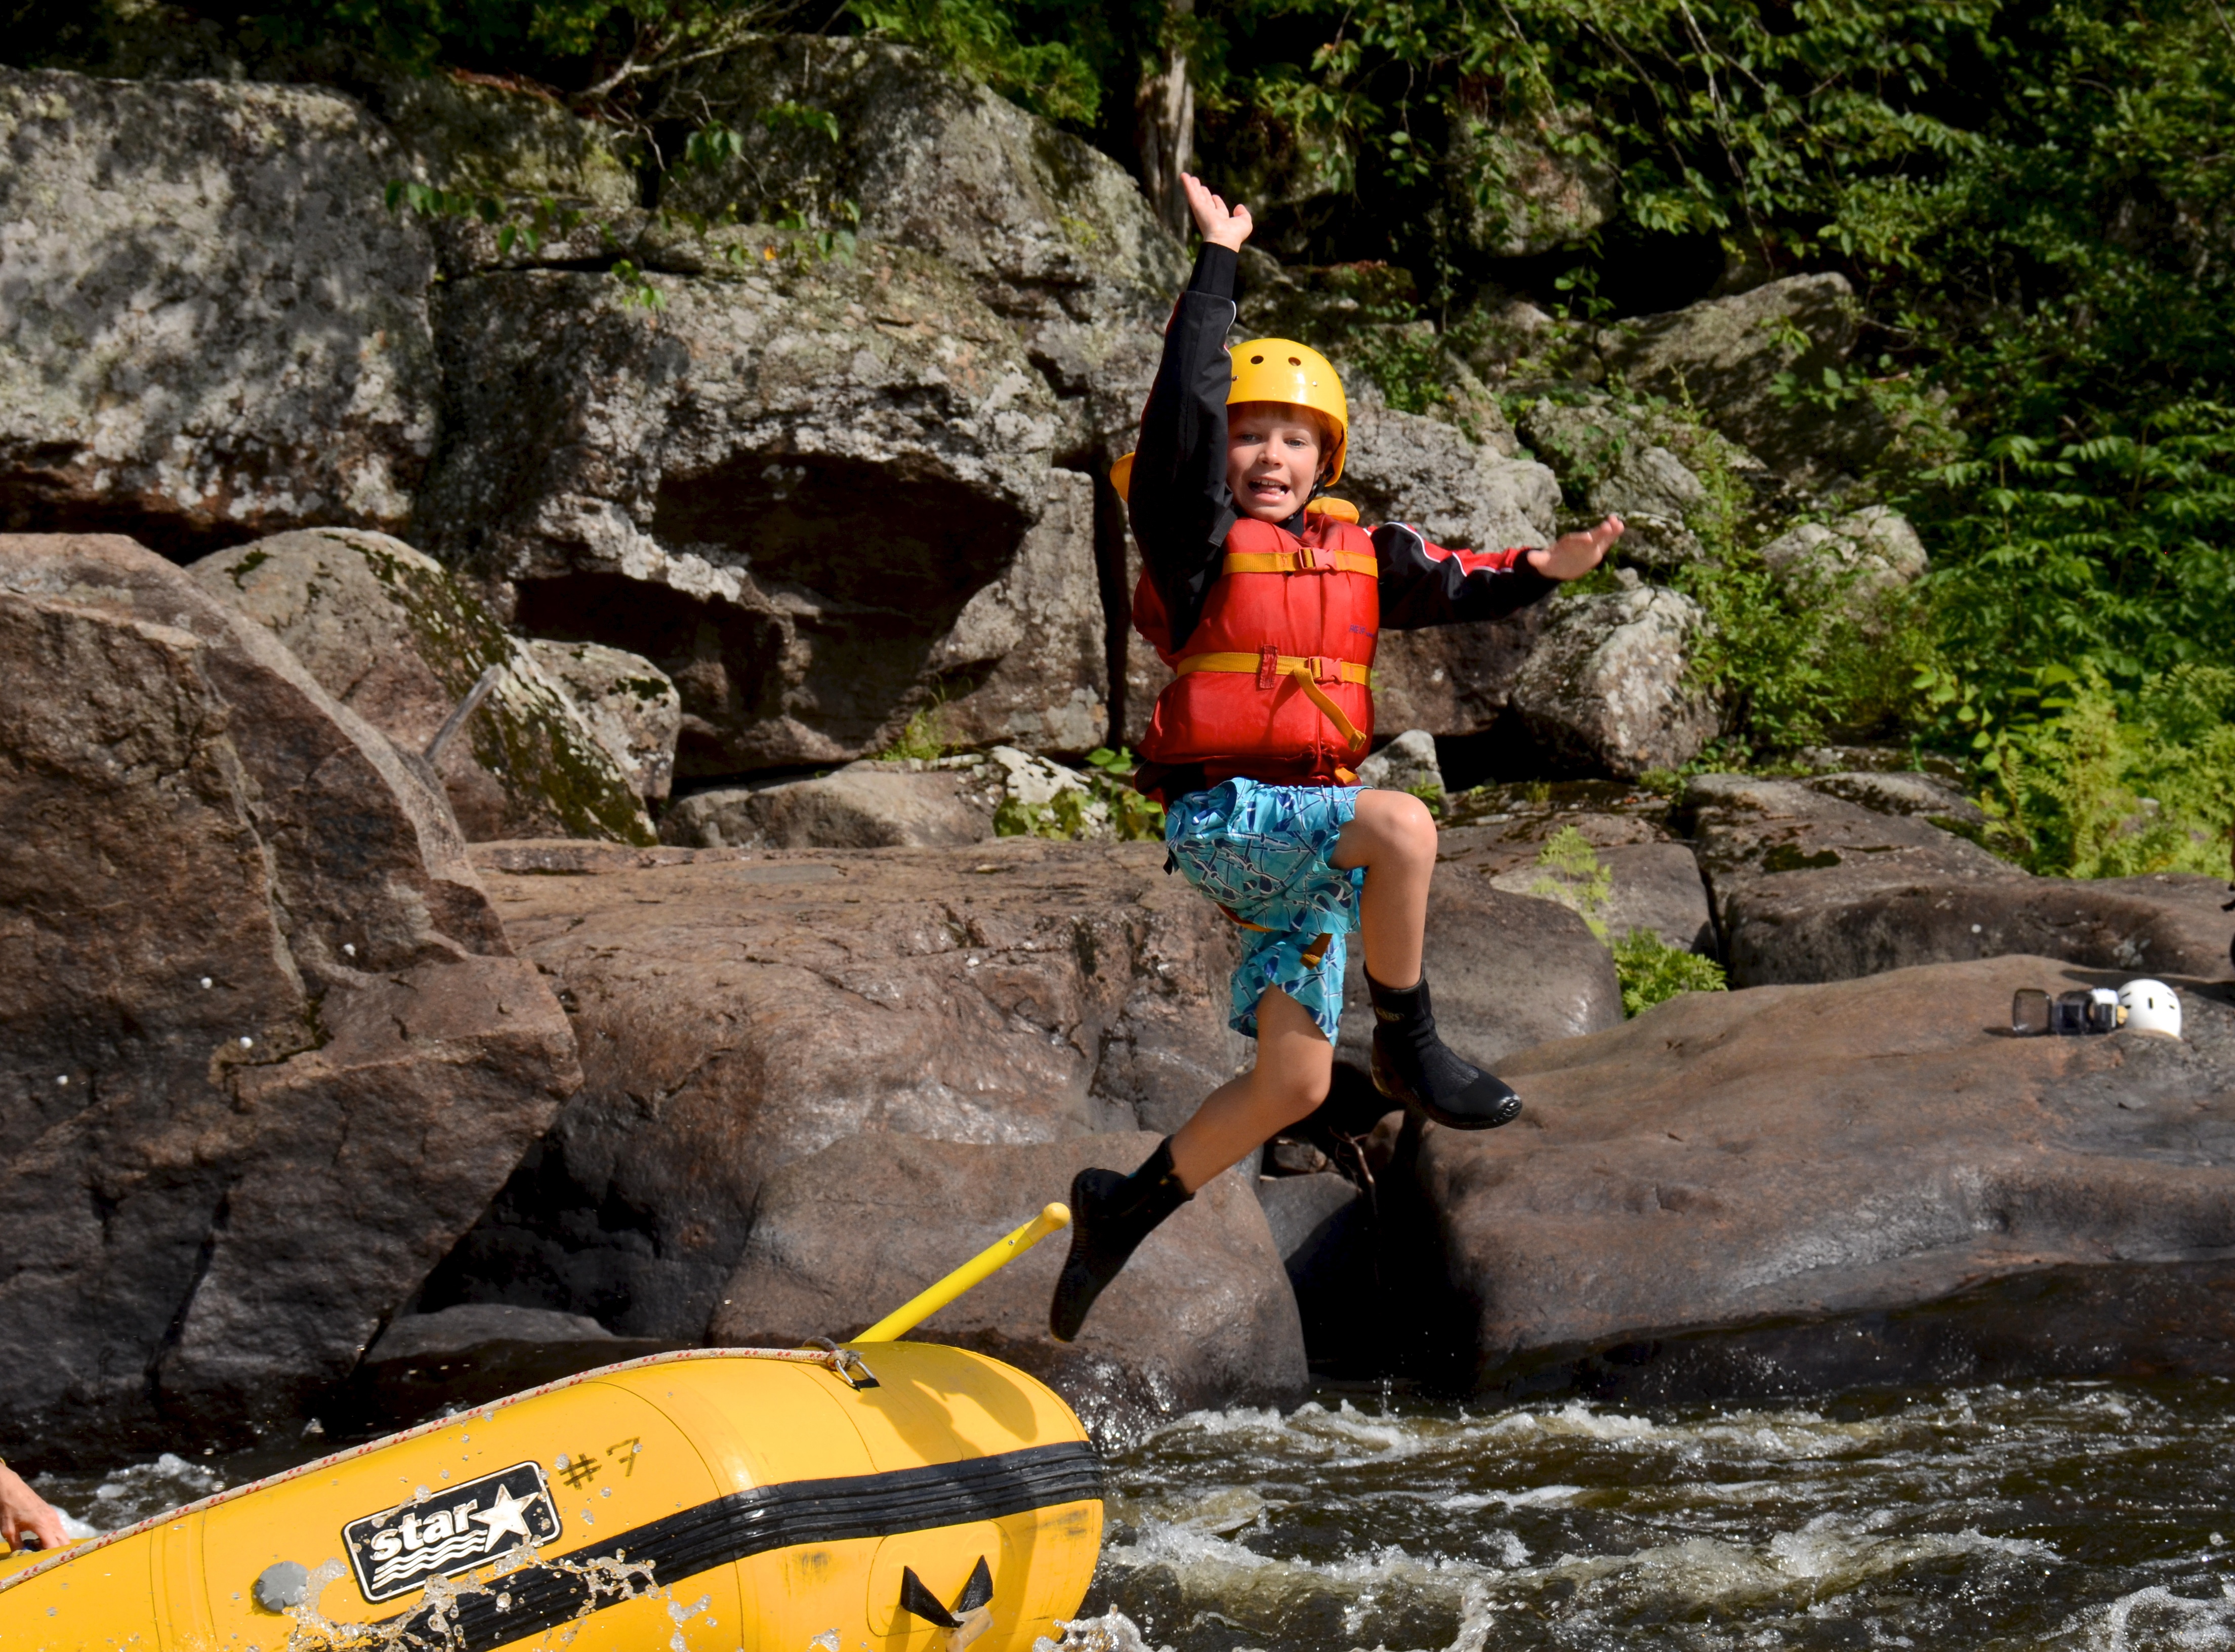 Promotional Rafting Video